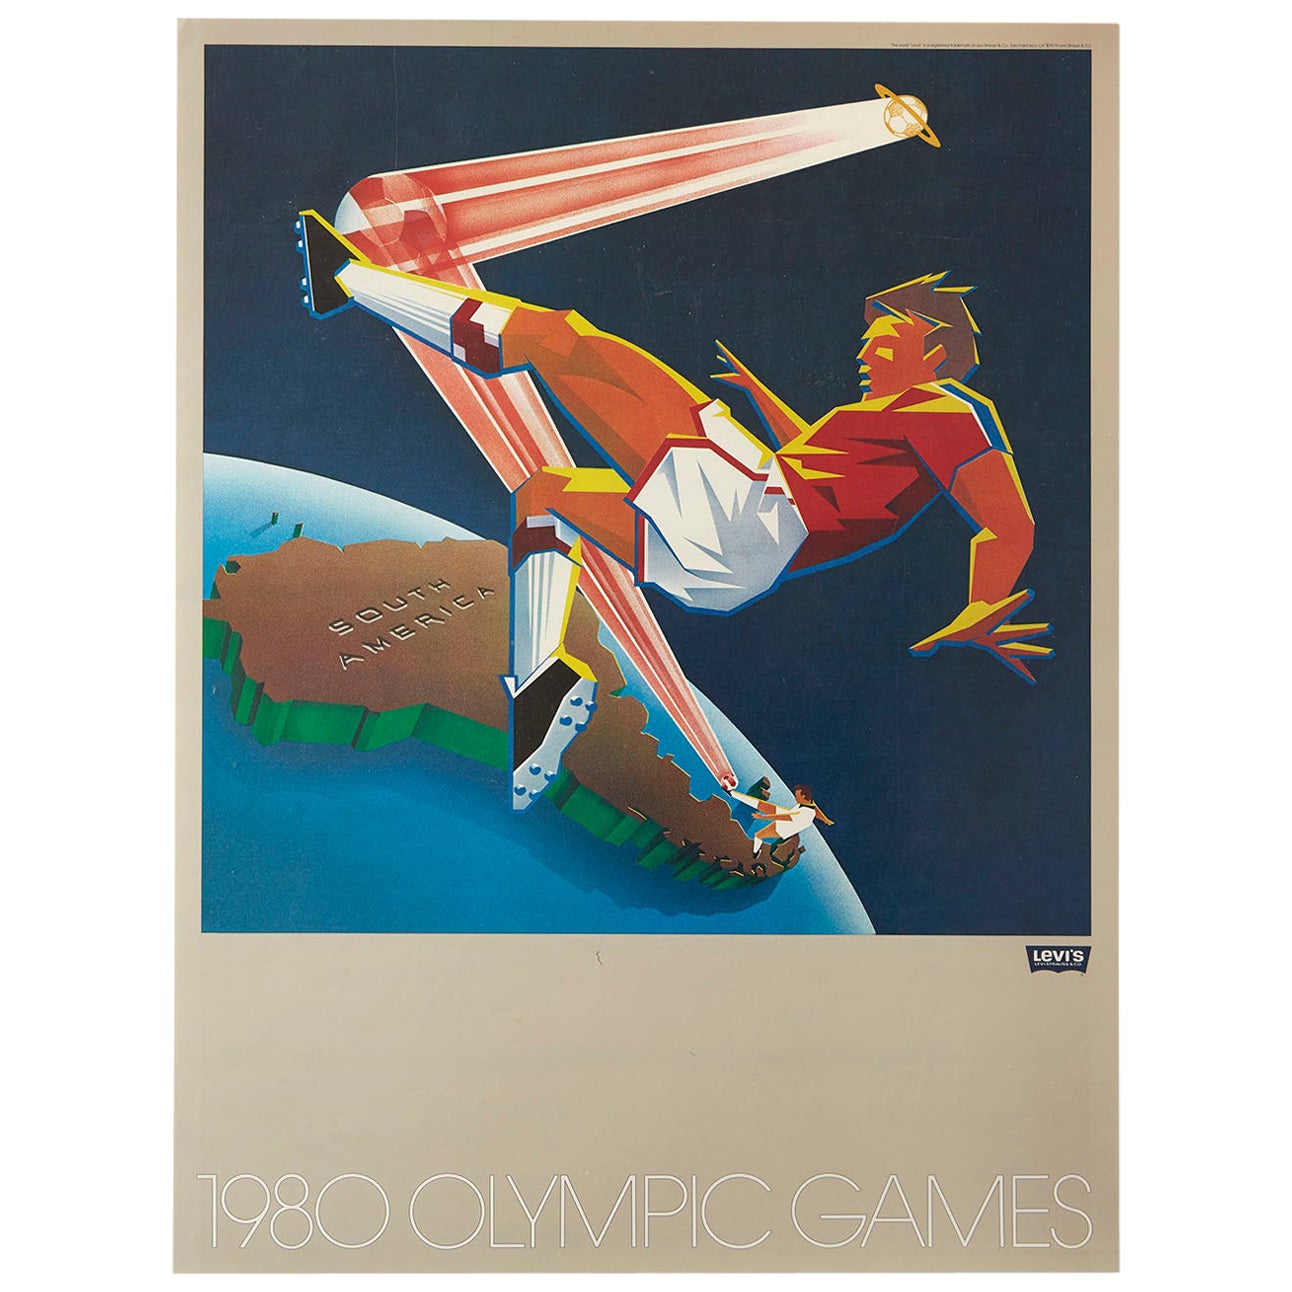 Original Vintage Sport Poster Levi's Moscow '80 Olympic Games S America Football